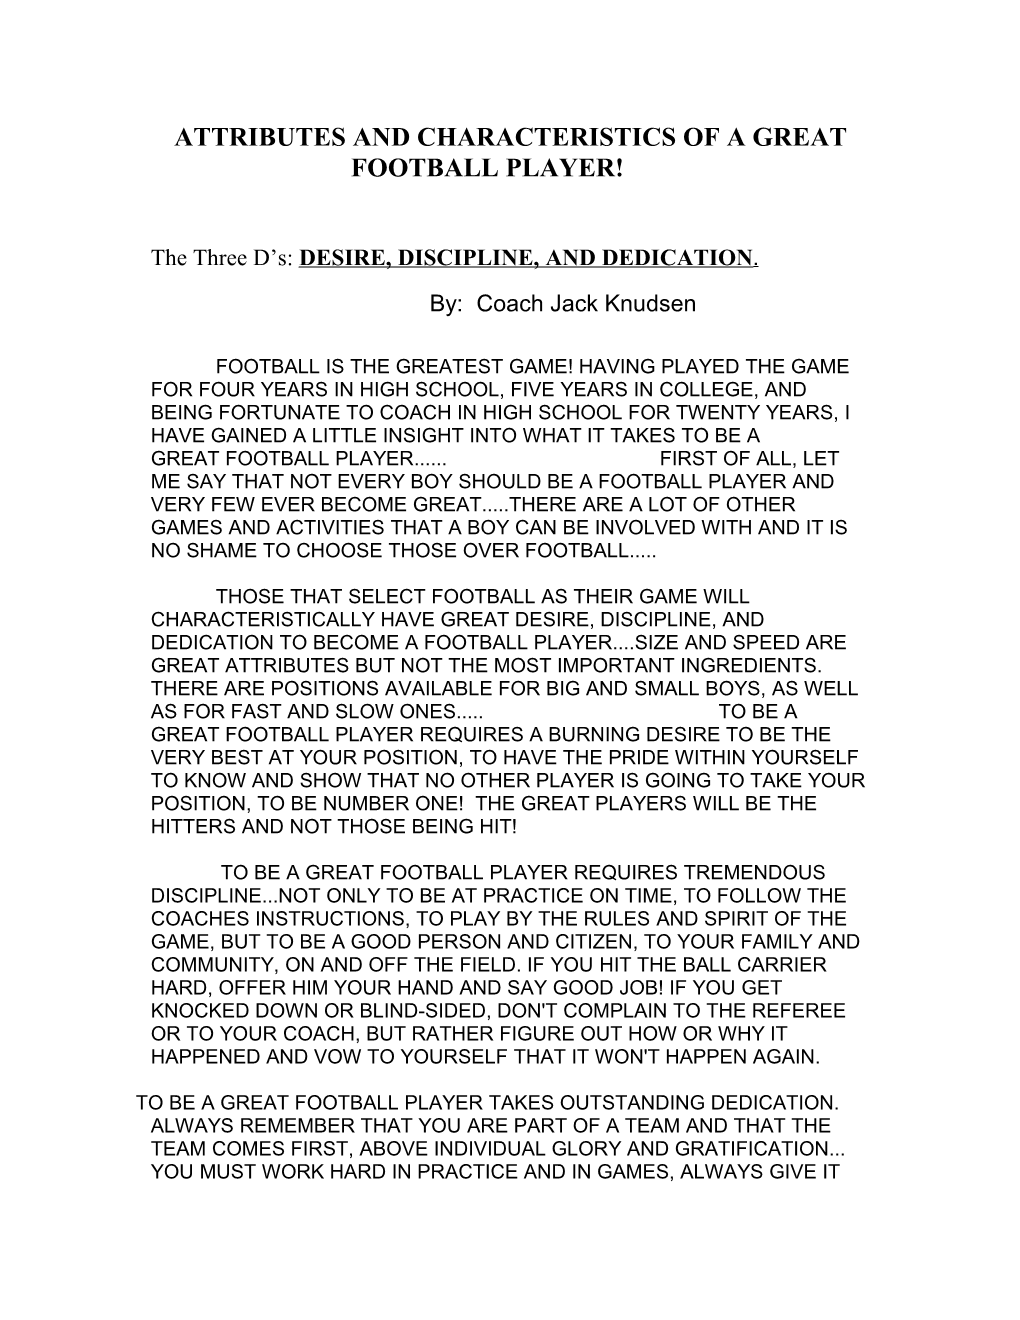 Attributes and Characteristics of a Great Football Player